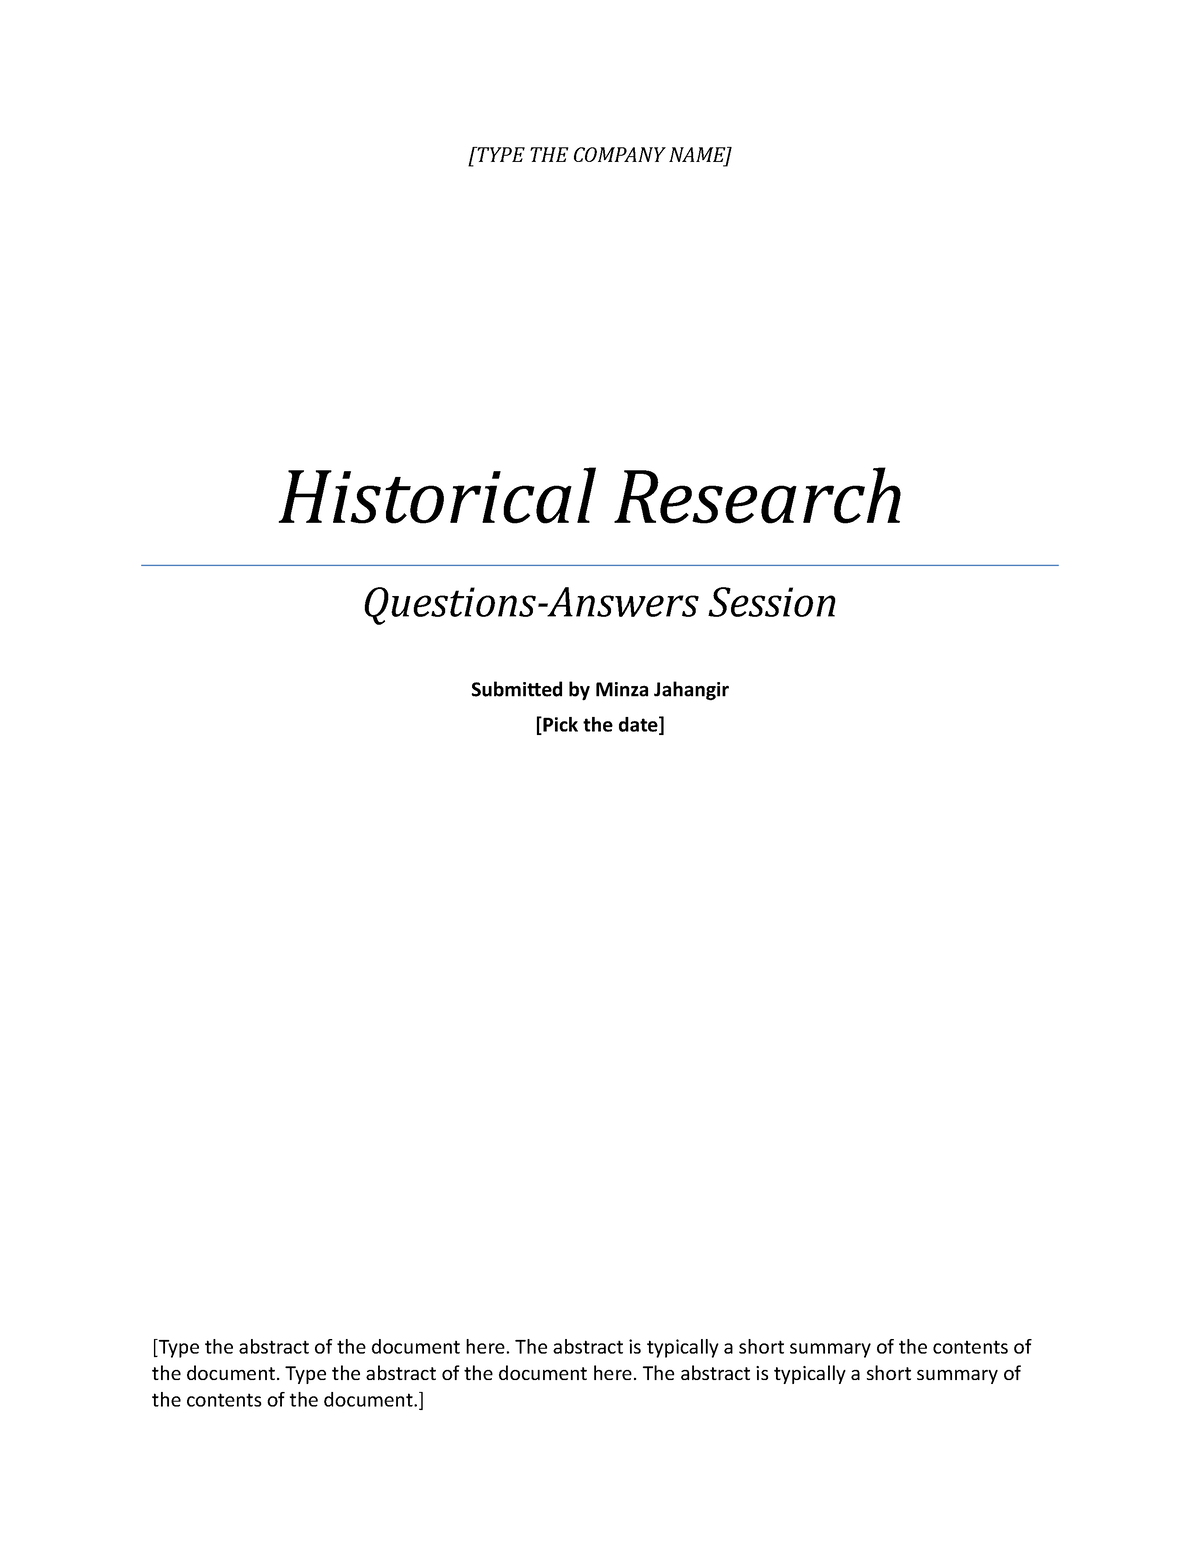 historical research questions